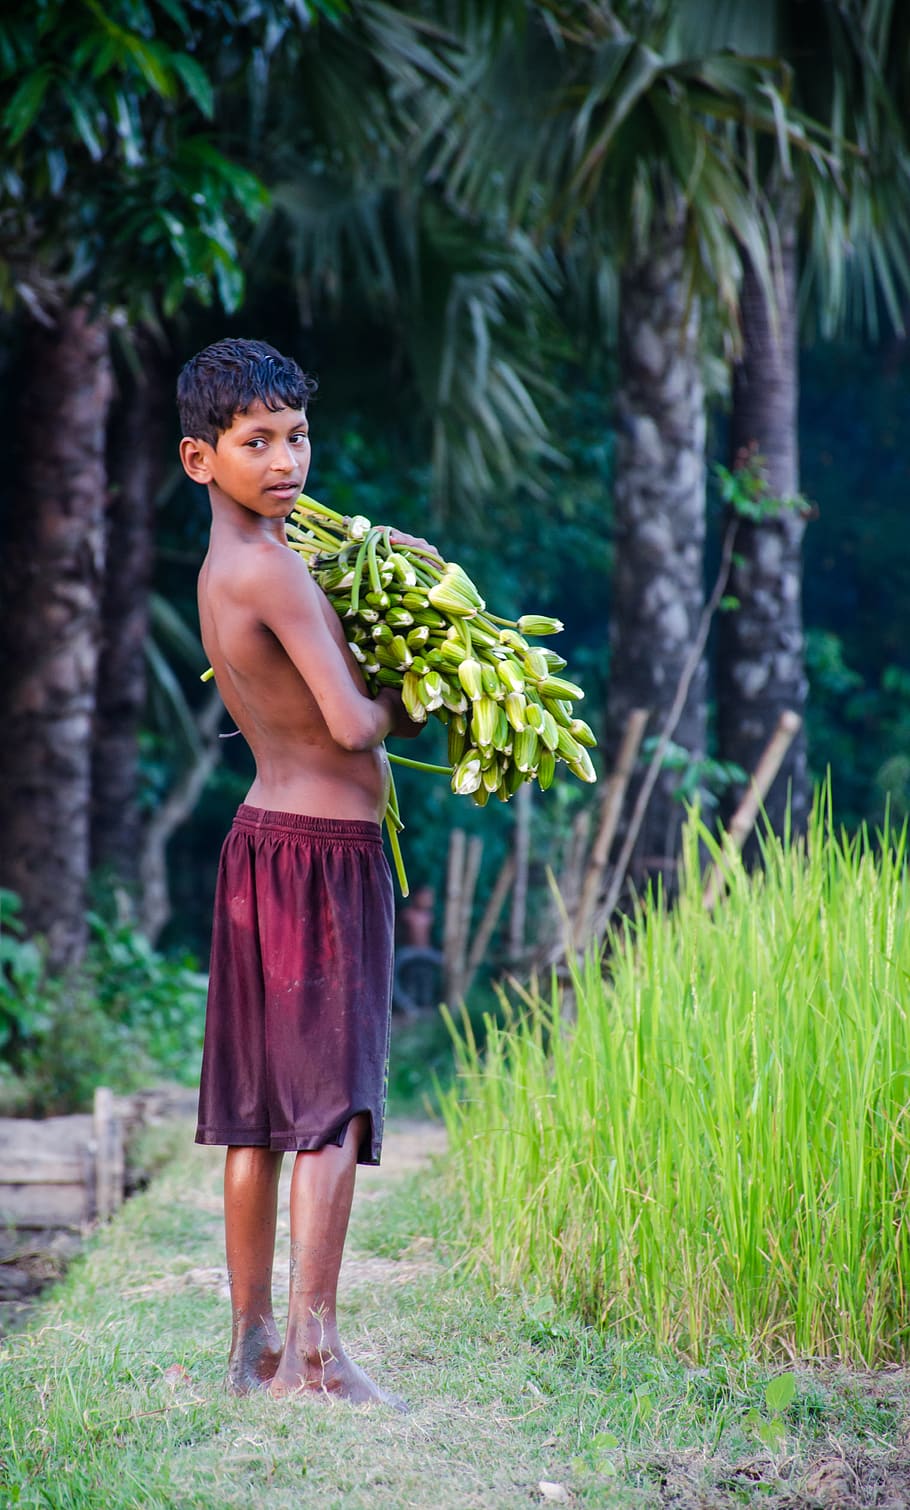 baby, boy, child, poor, plant, full length, one person, standing, real people, nature